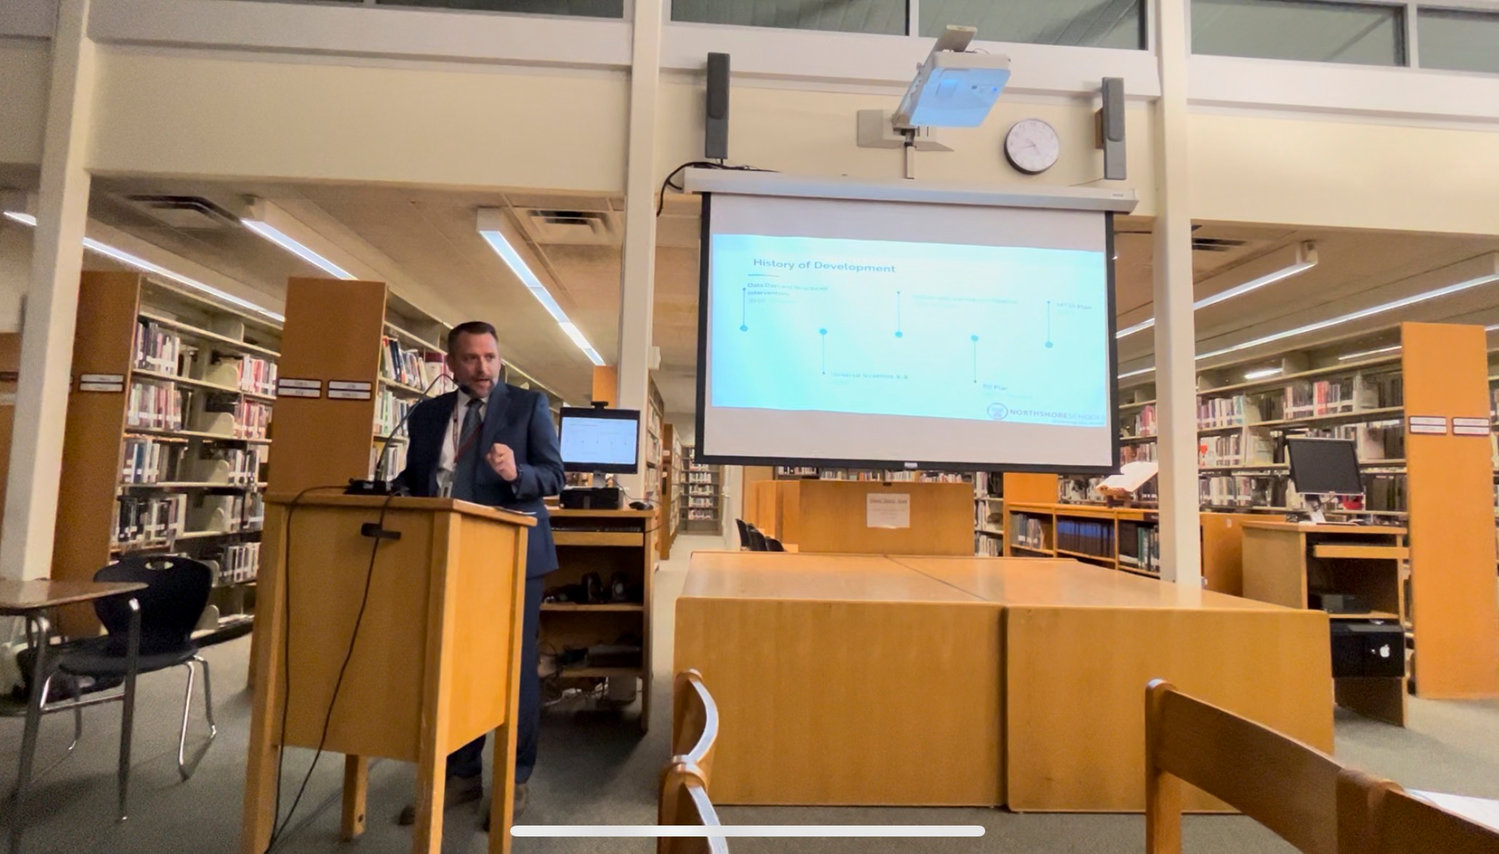 Dr. Chris Zublionis explained to the community that the RtI system ensures the district is able to address, assess and monitor any learning or behavioral problem students may encounter.